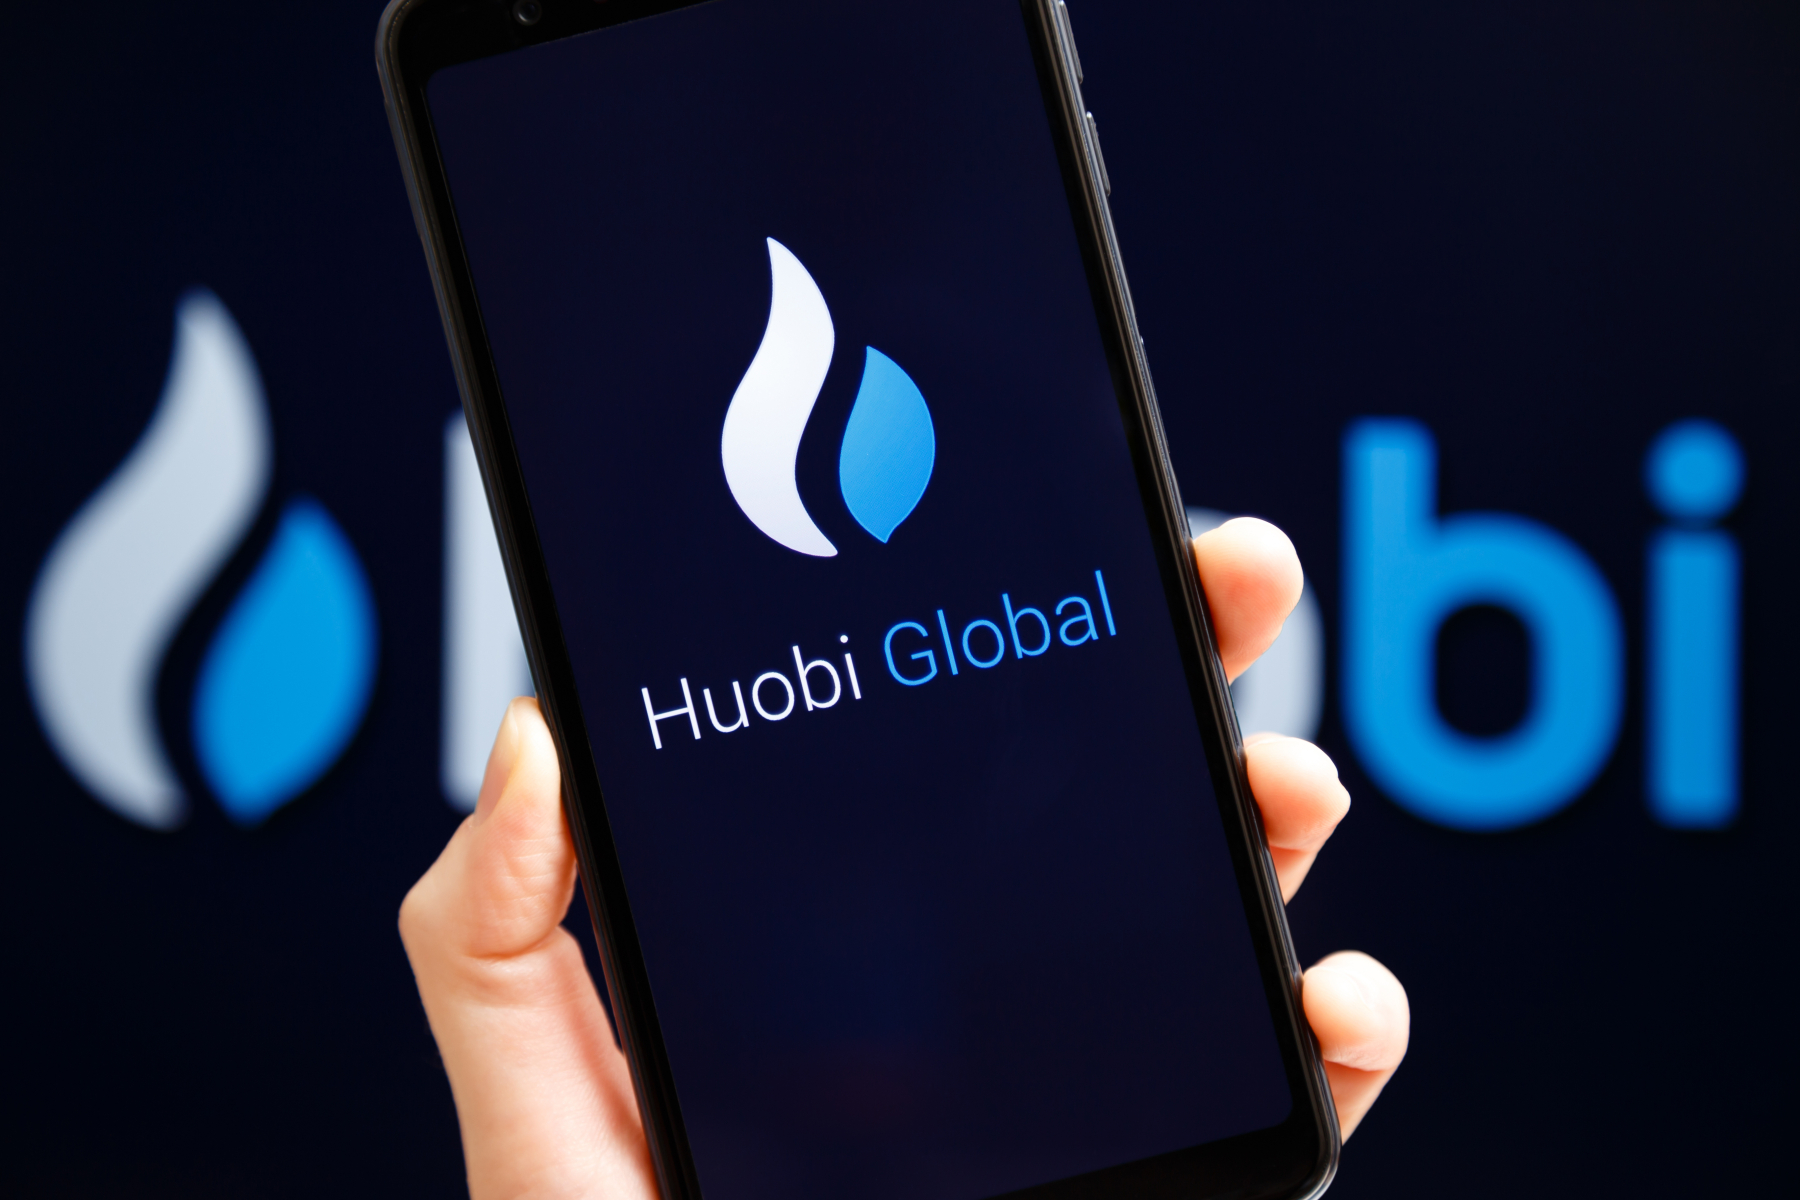 Huobi Global plans to move to the Caribbean
